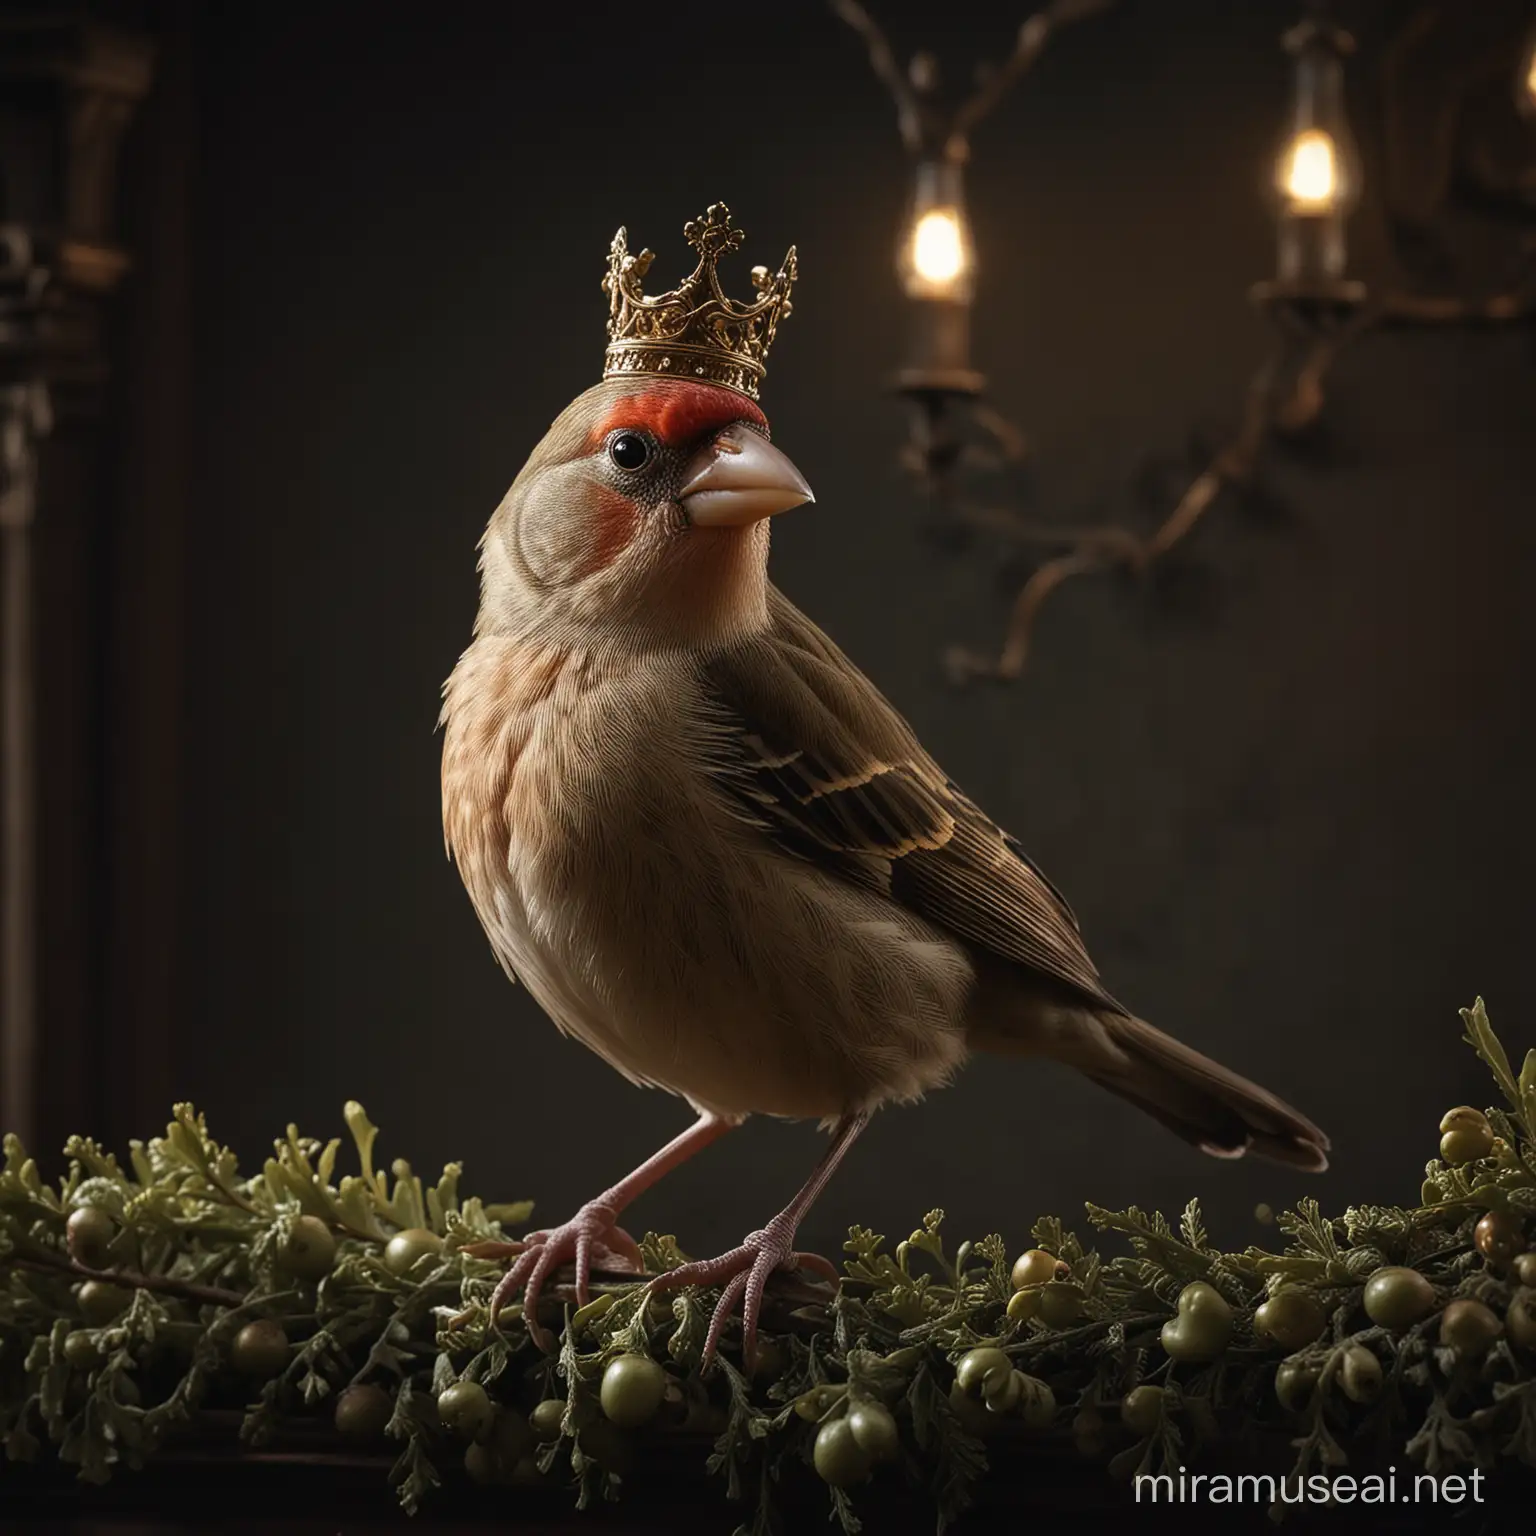 "Produce an image portraying a finch perched gracefully, adorned with a vintage, delicately crafted crown upon its head looking into camera. The finch should emanate an aura of regality, with its posture conveying poise and elegance. Set against a backdrop of a dark, neon-lit environment, the scene should exude an intriguing blend of modernity and antiquity. The lighting should accentuate the finch's features and the ornate details of the crown, creating a visually captivating composition."